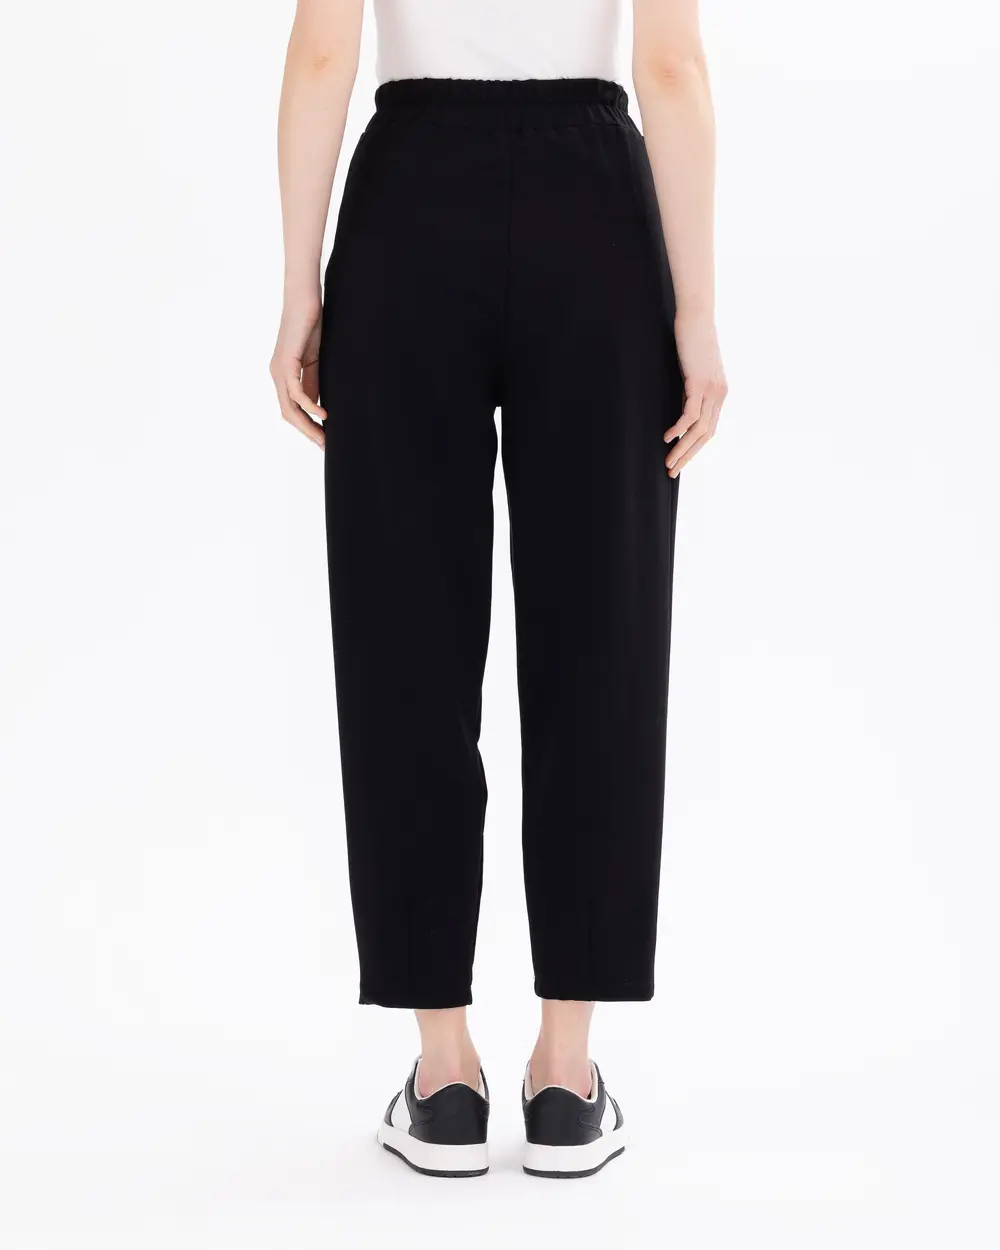 Ankle Length Sweatpants with Pockets